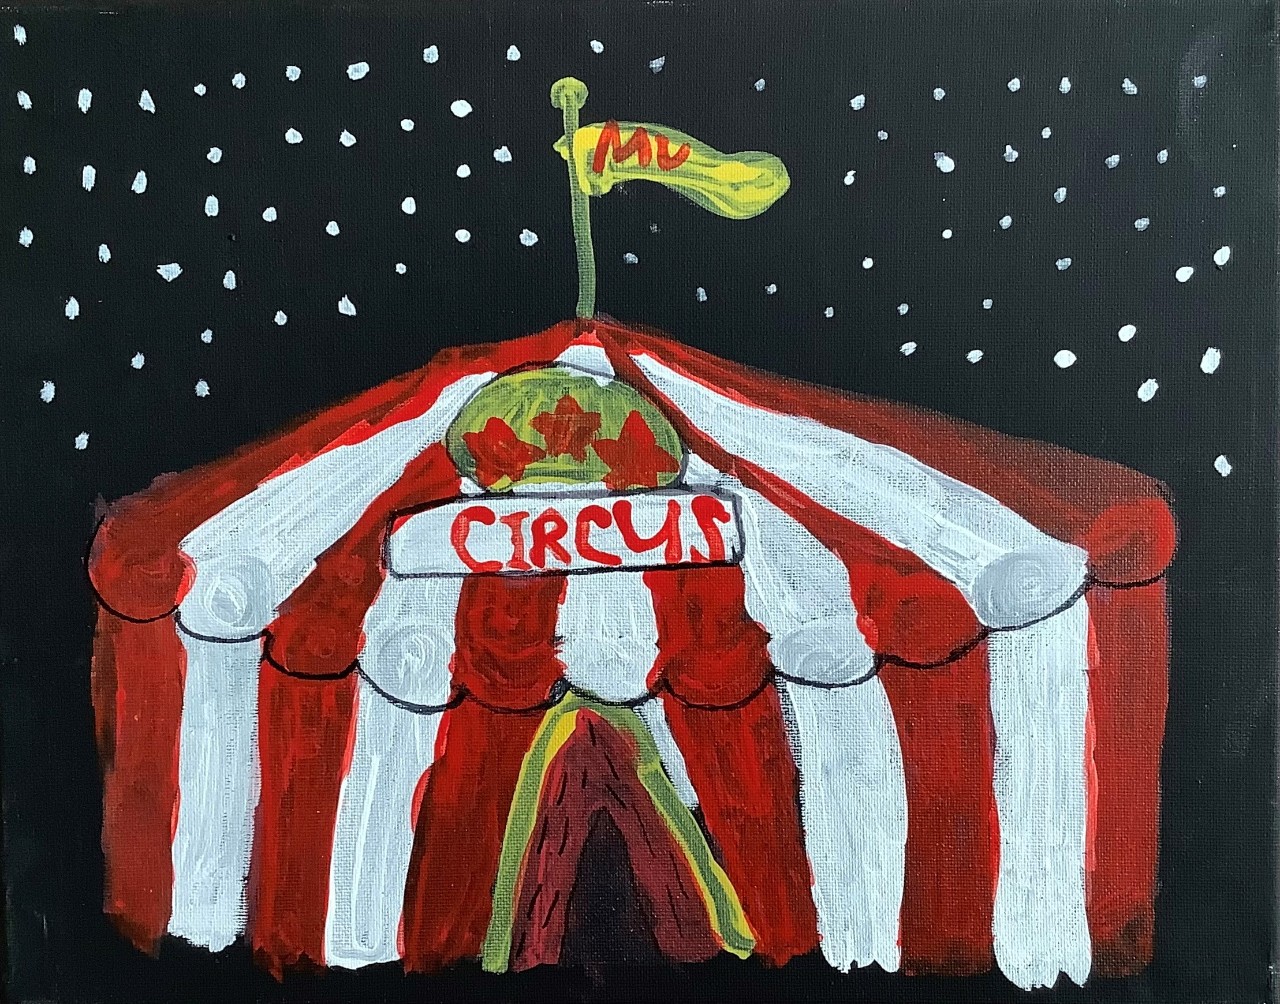 A bright red and white striped circus tent on a starry night features a yellow flag waving at its peak with the artist’s initials, M.V.